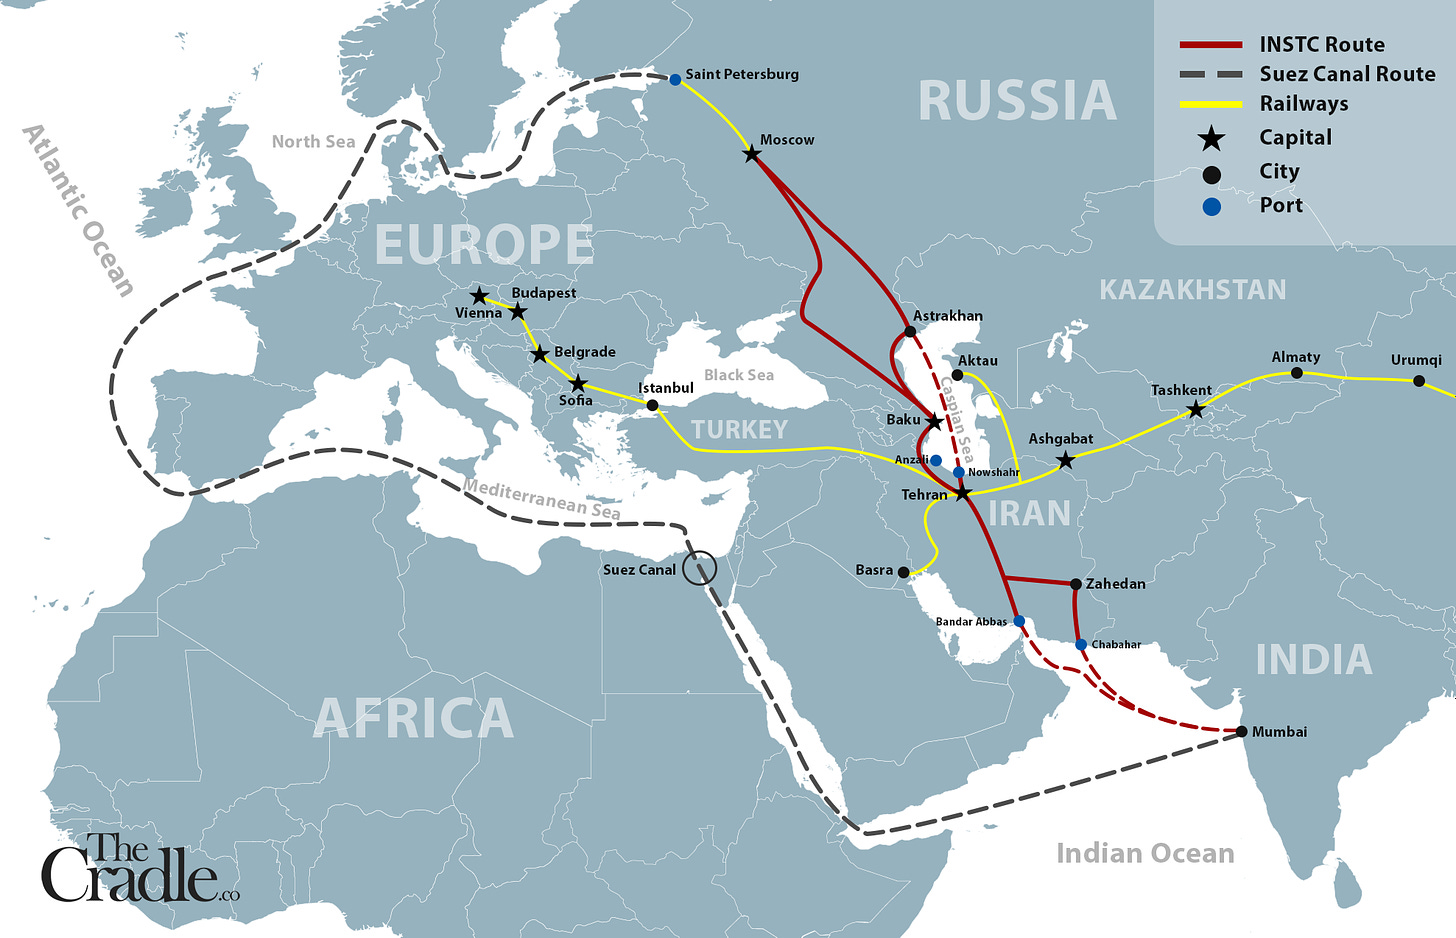 Map of the International North South Transport Corridor (INSTC), linking Russia, Iran, India